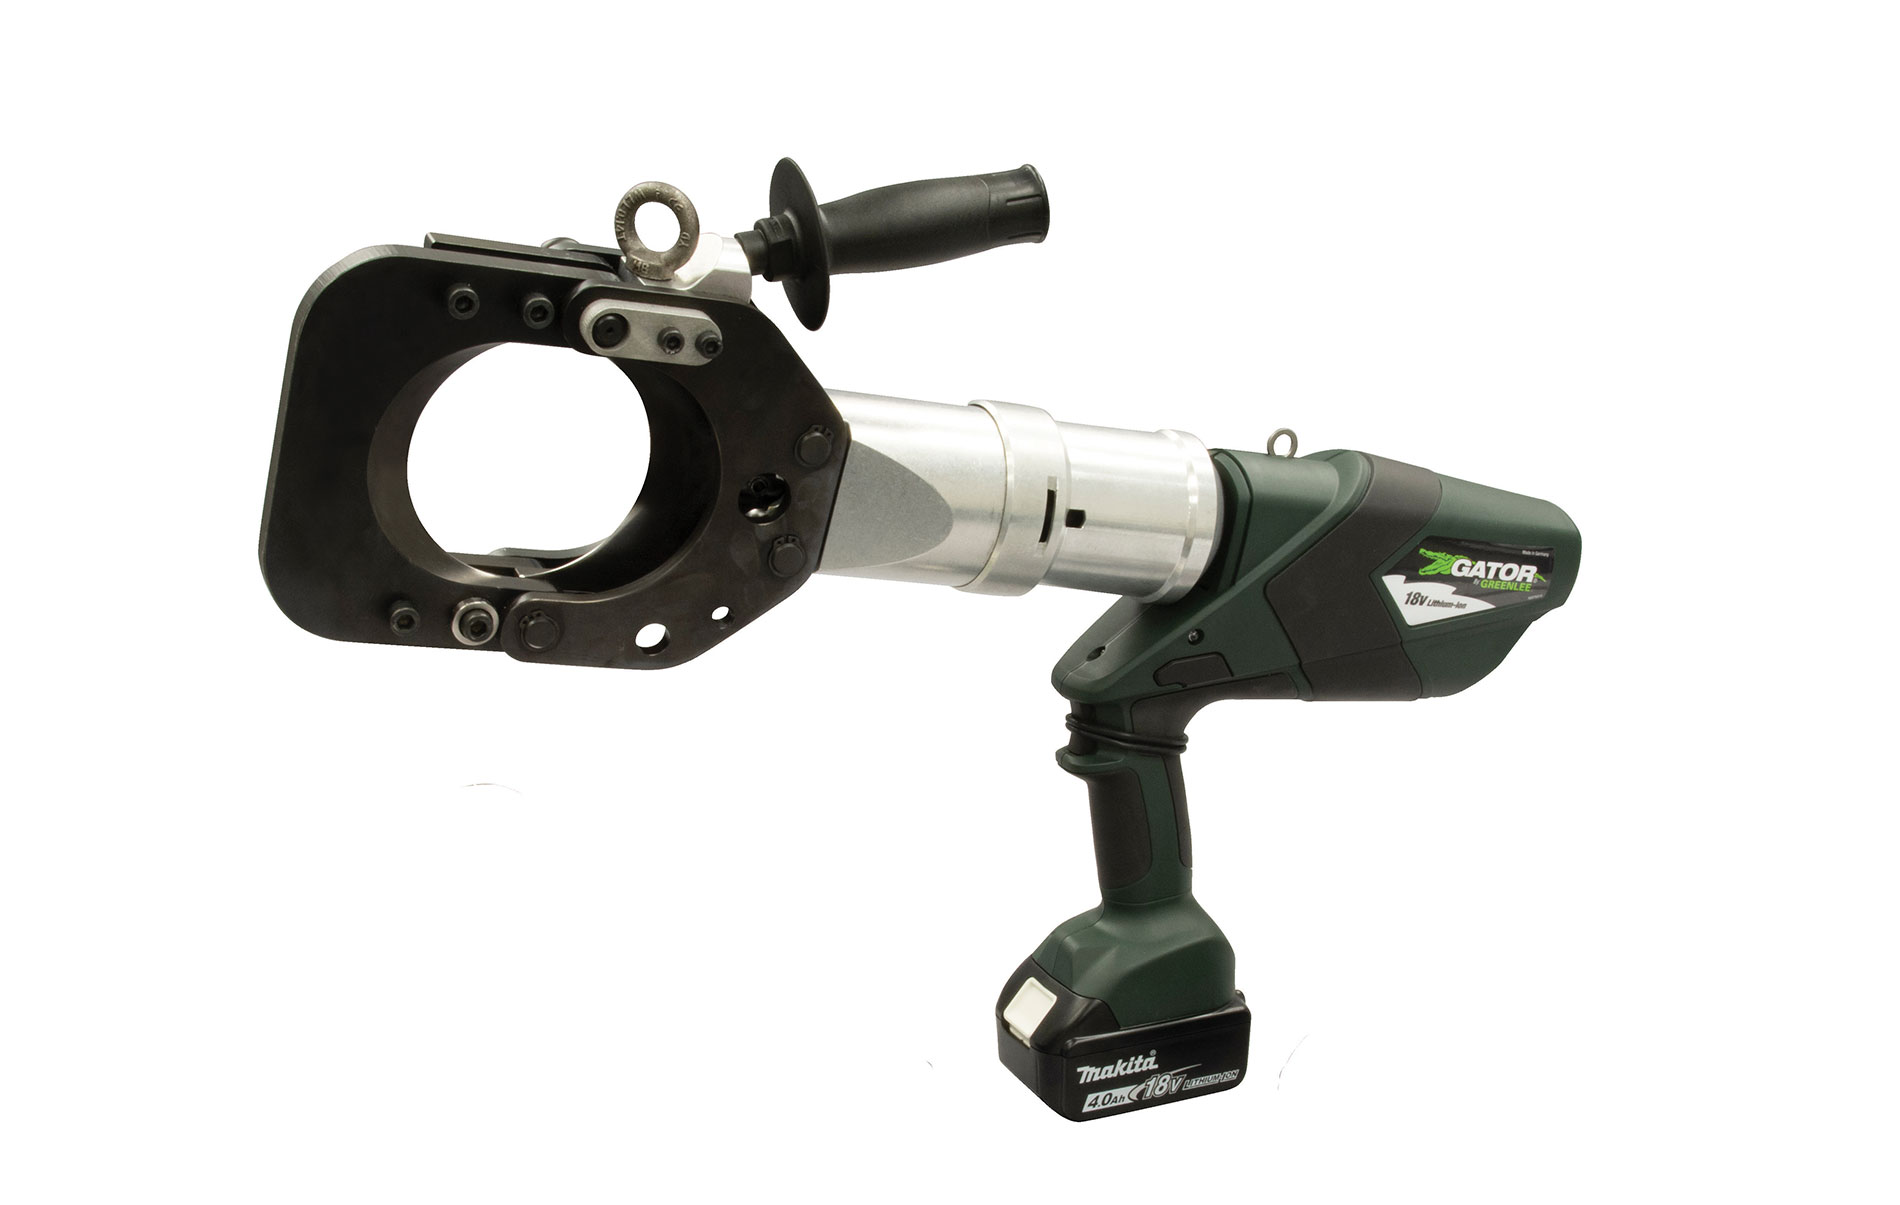 Greenlee’s ESG105LXR Gator remote cable cutter